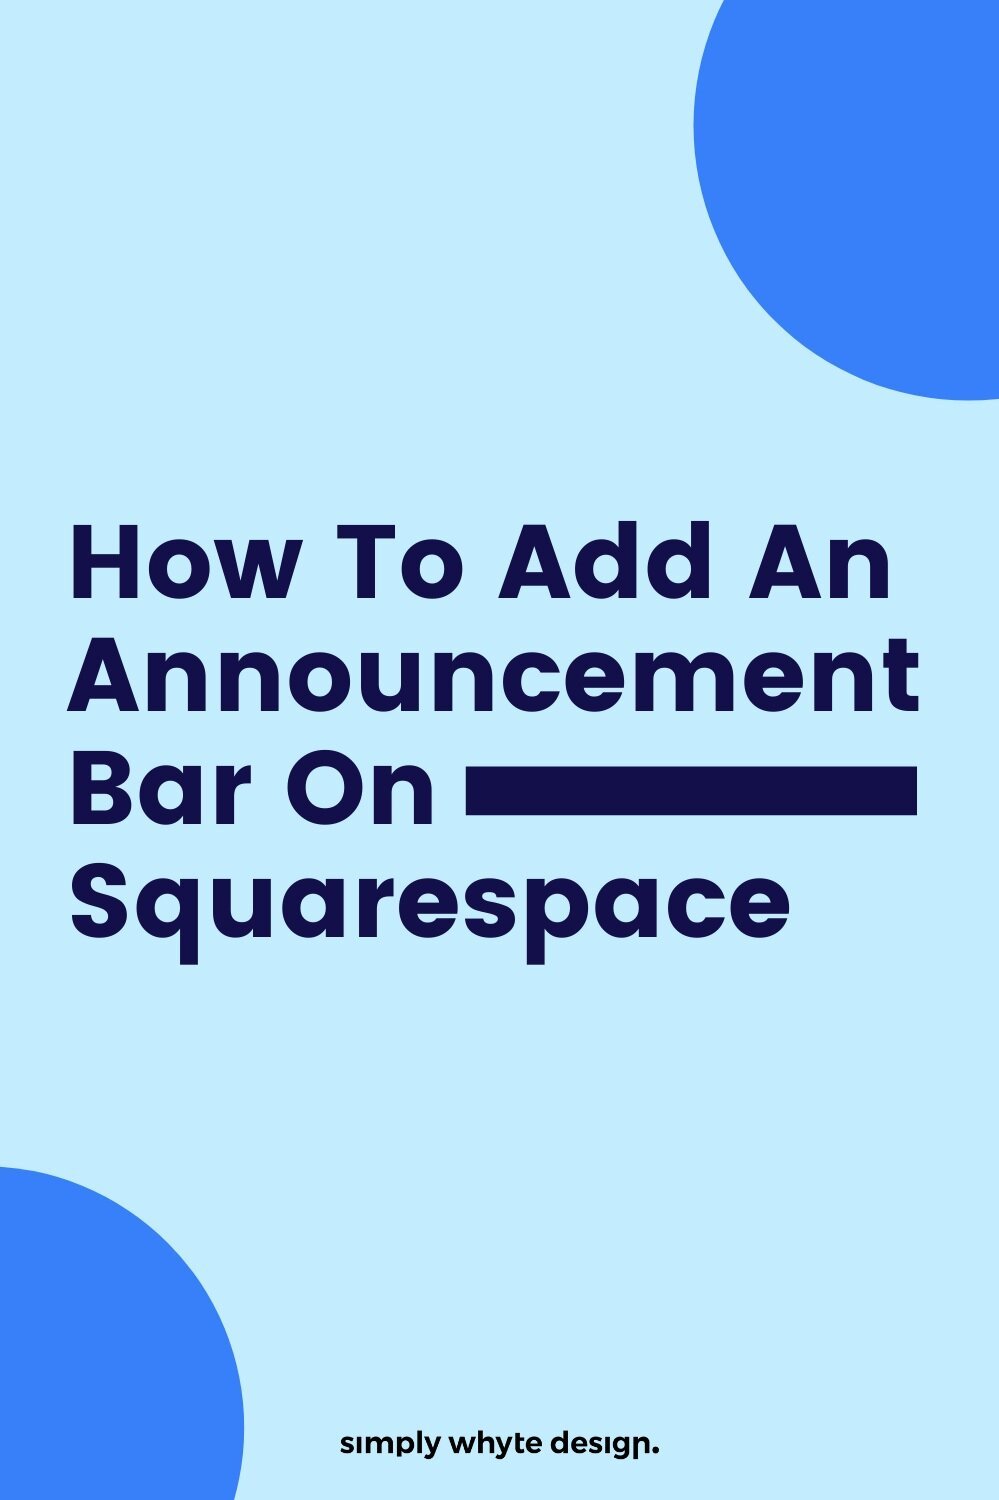 how to add an announcement bar on squarespace